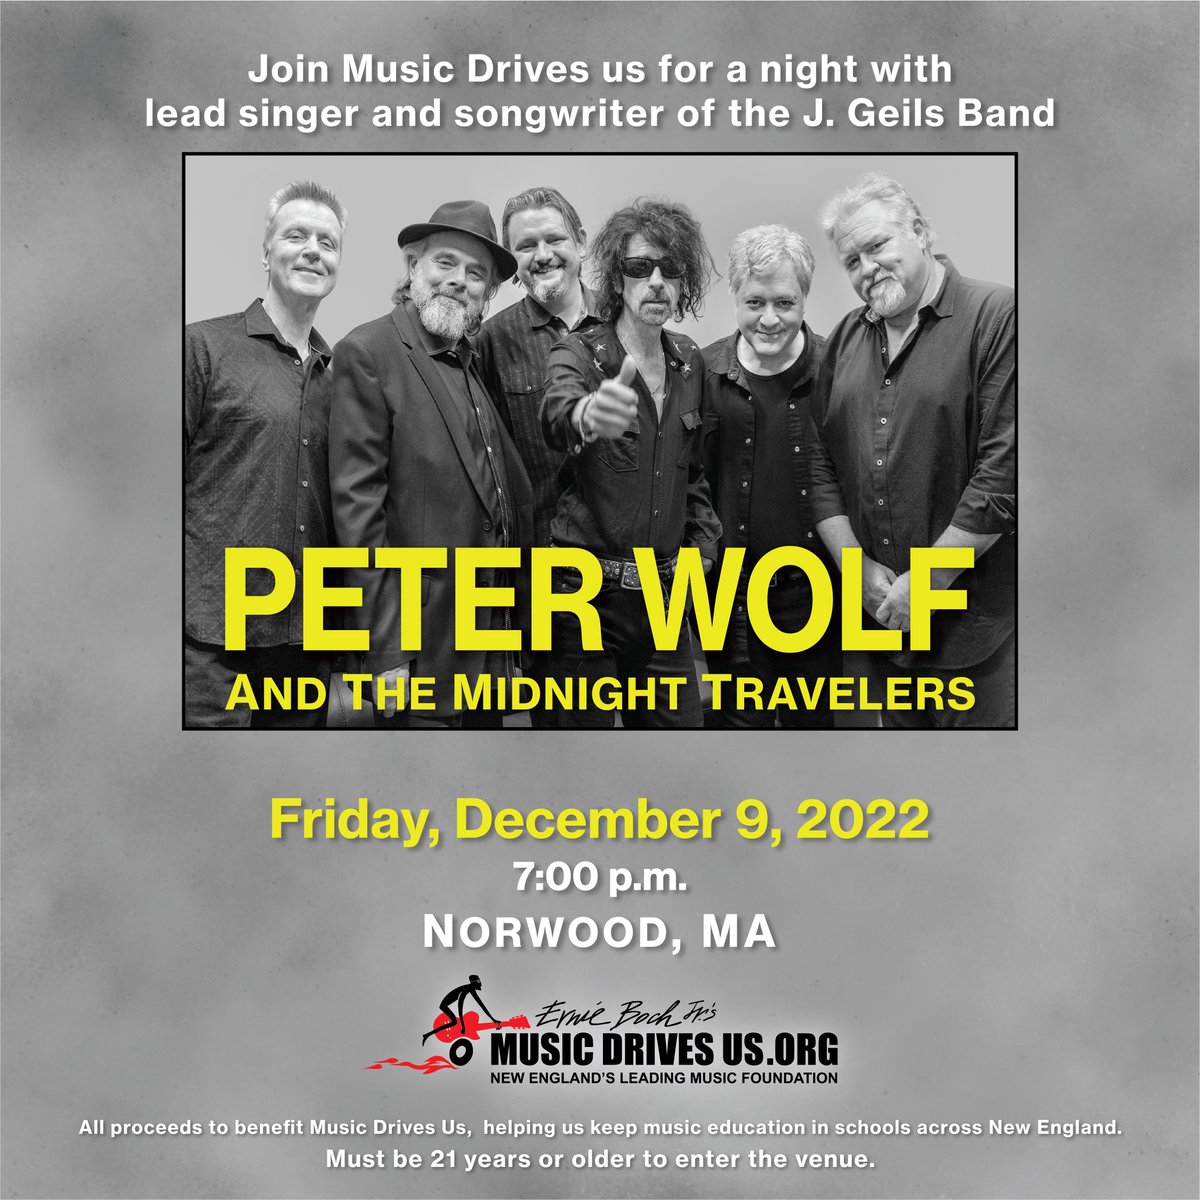 Tickets On Sale Now! 🎟️ Join MDU for a night with lead singer of the J. Geils Band, Peter Wolf, on 12/9! Wolf will perform hits like 'Centerfold' & songs from his time with The Midnight Travelers. Visit bit.ly/3U3Yywk to grab your tickets! All proceeds will benefit MDU.